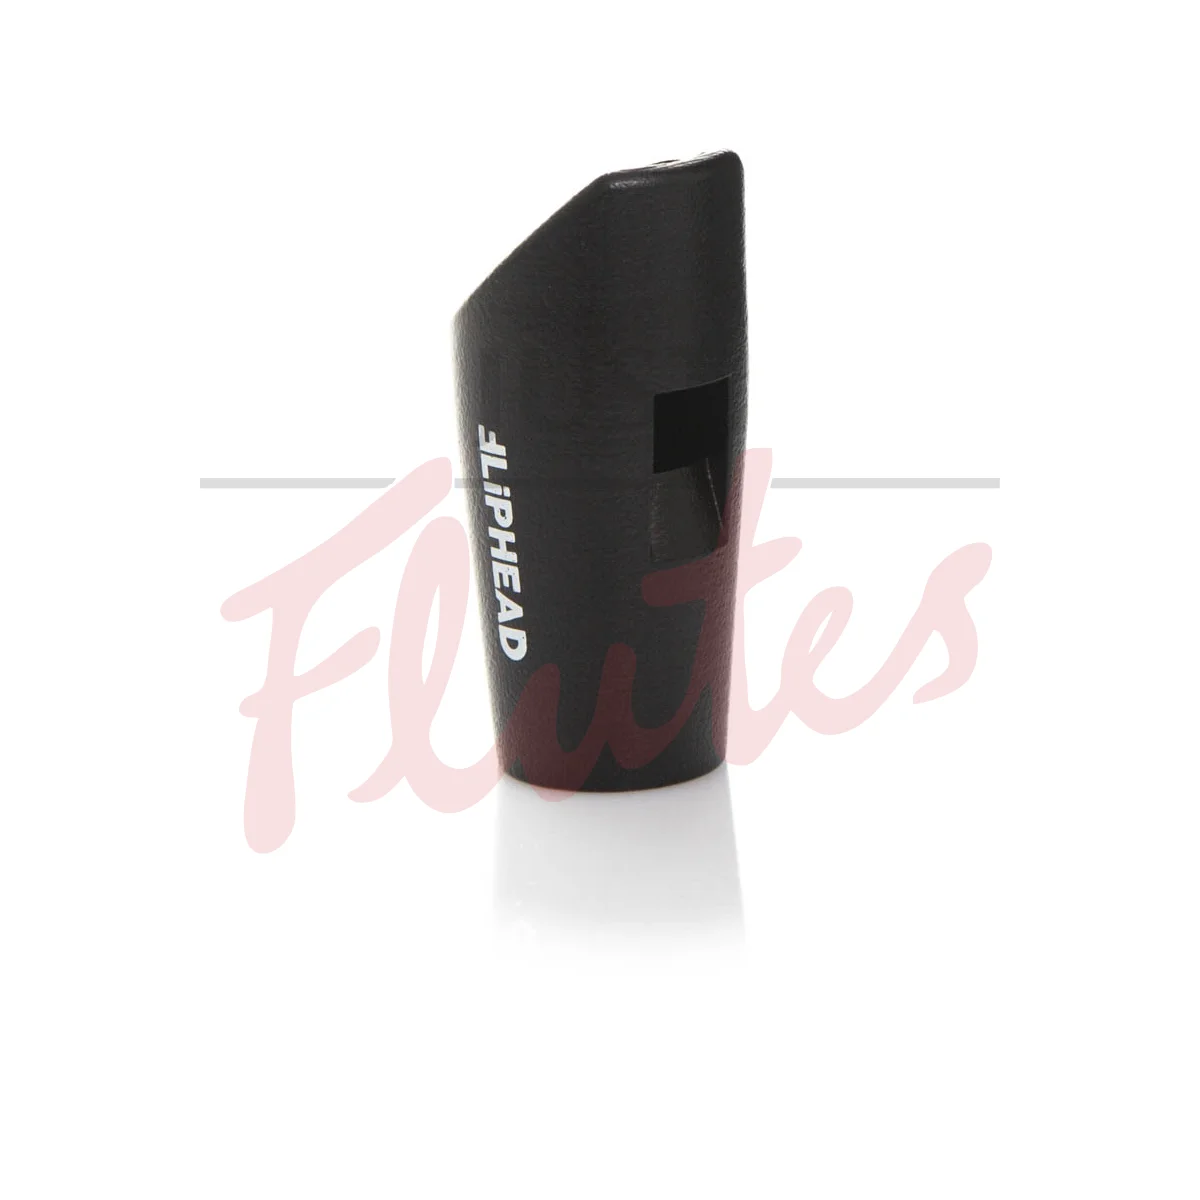 Fliphead AM-1 Whistle Mouthpiece (Mouthpiece Only)